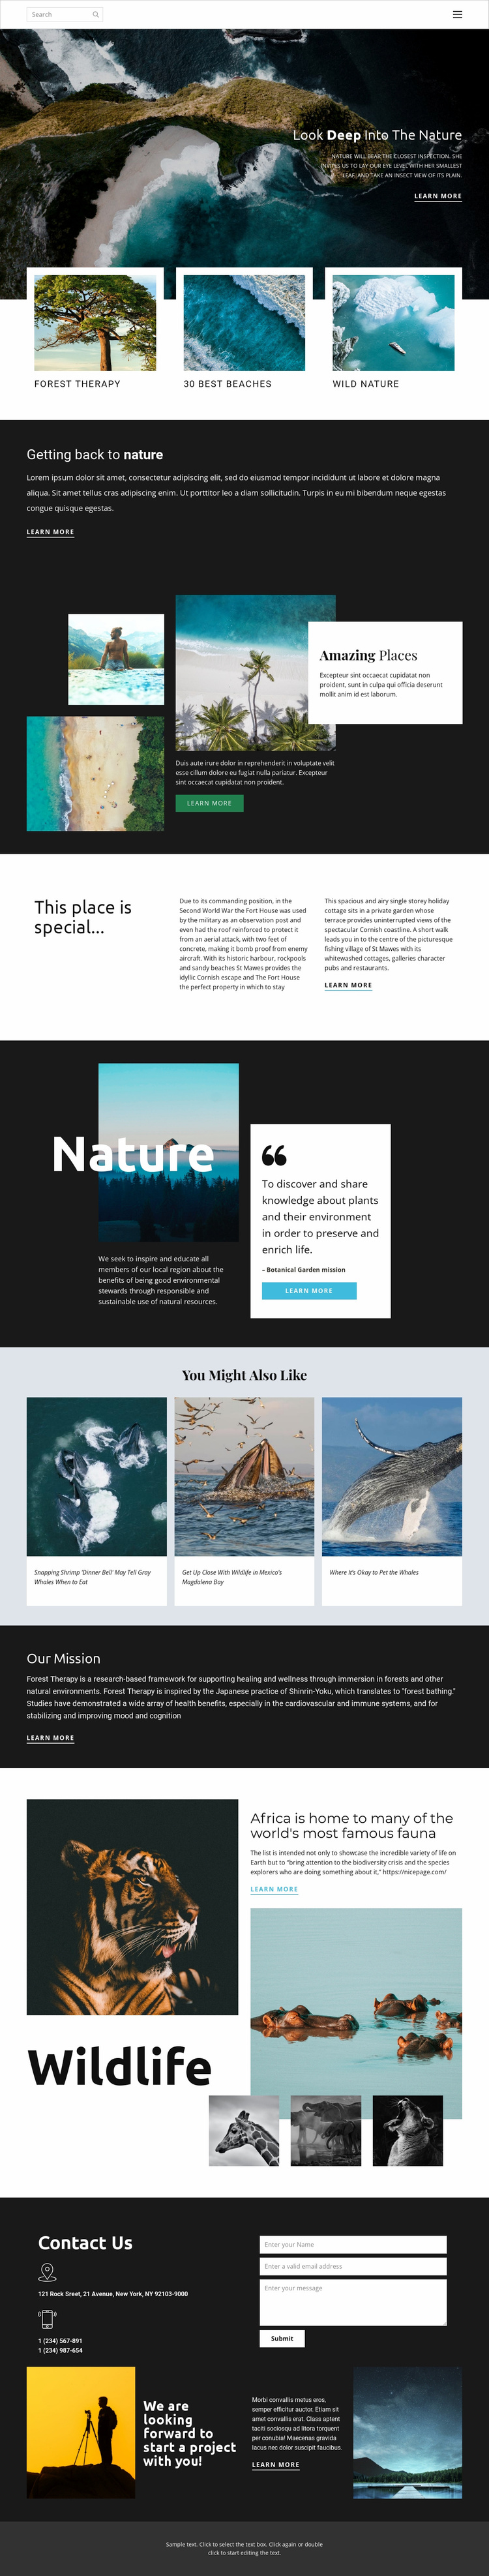 Exploring wildlife and nature Landing Page